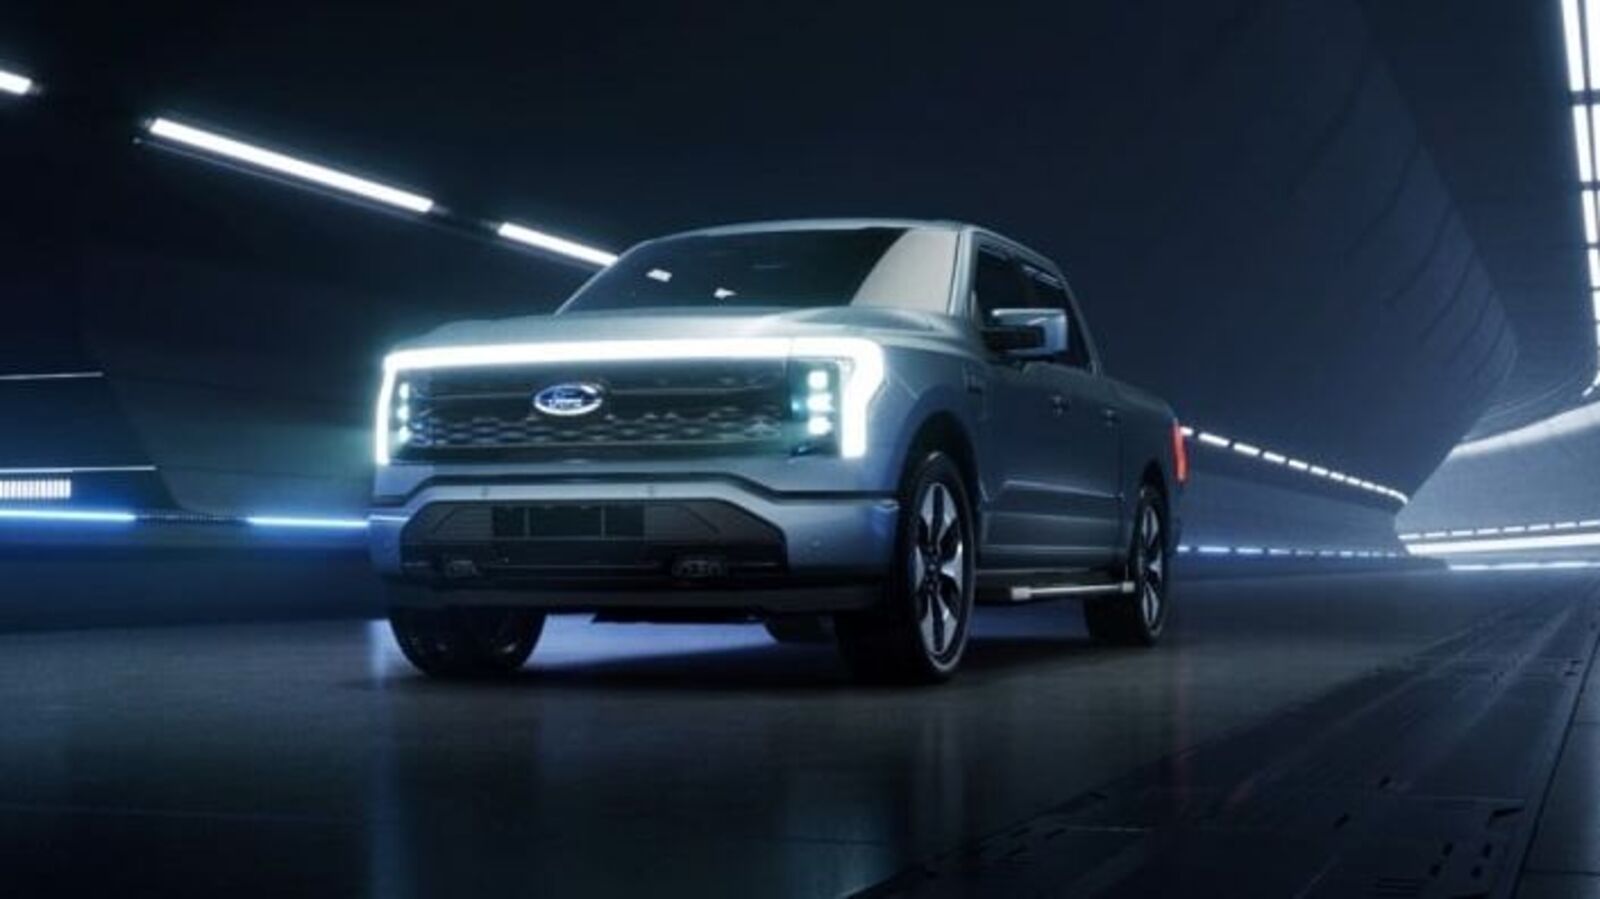 Ford pauses F-150 Lightning EV production and shipments. Here's why